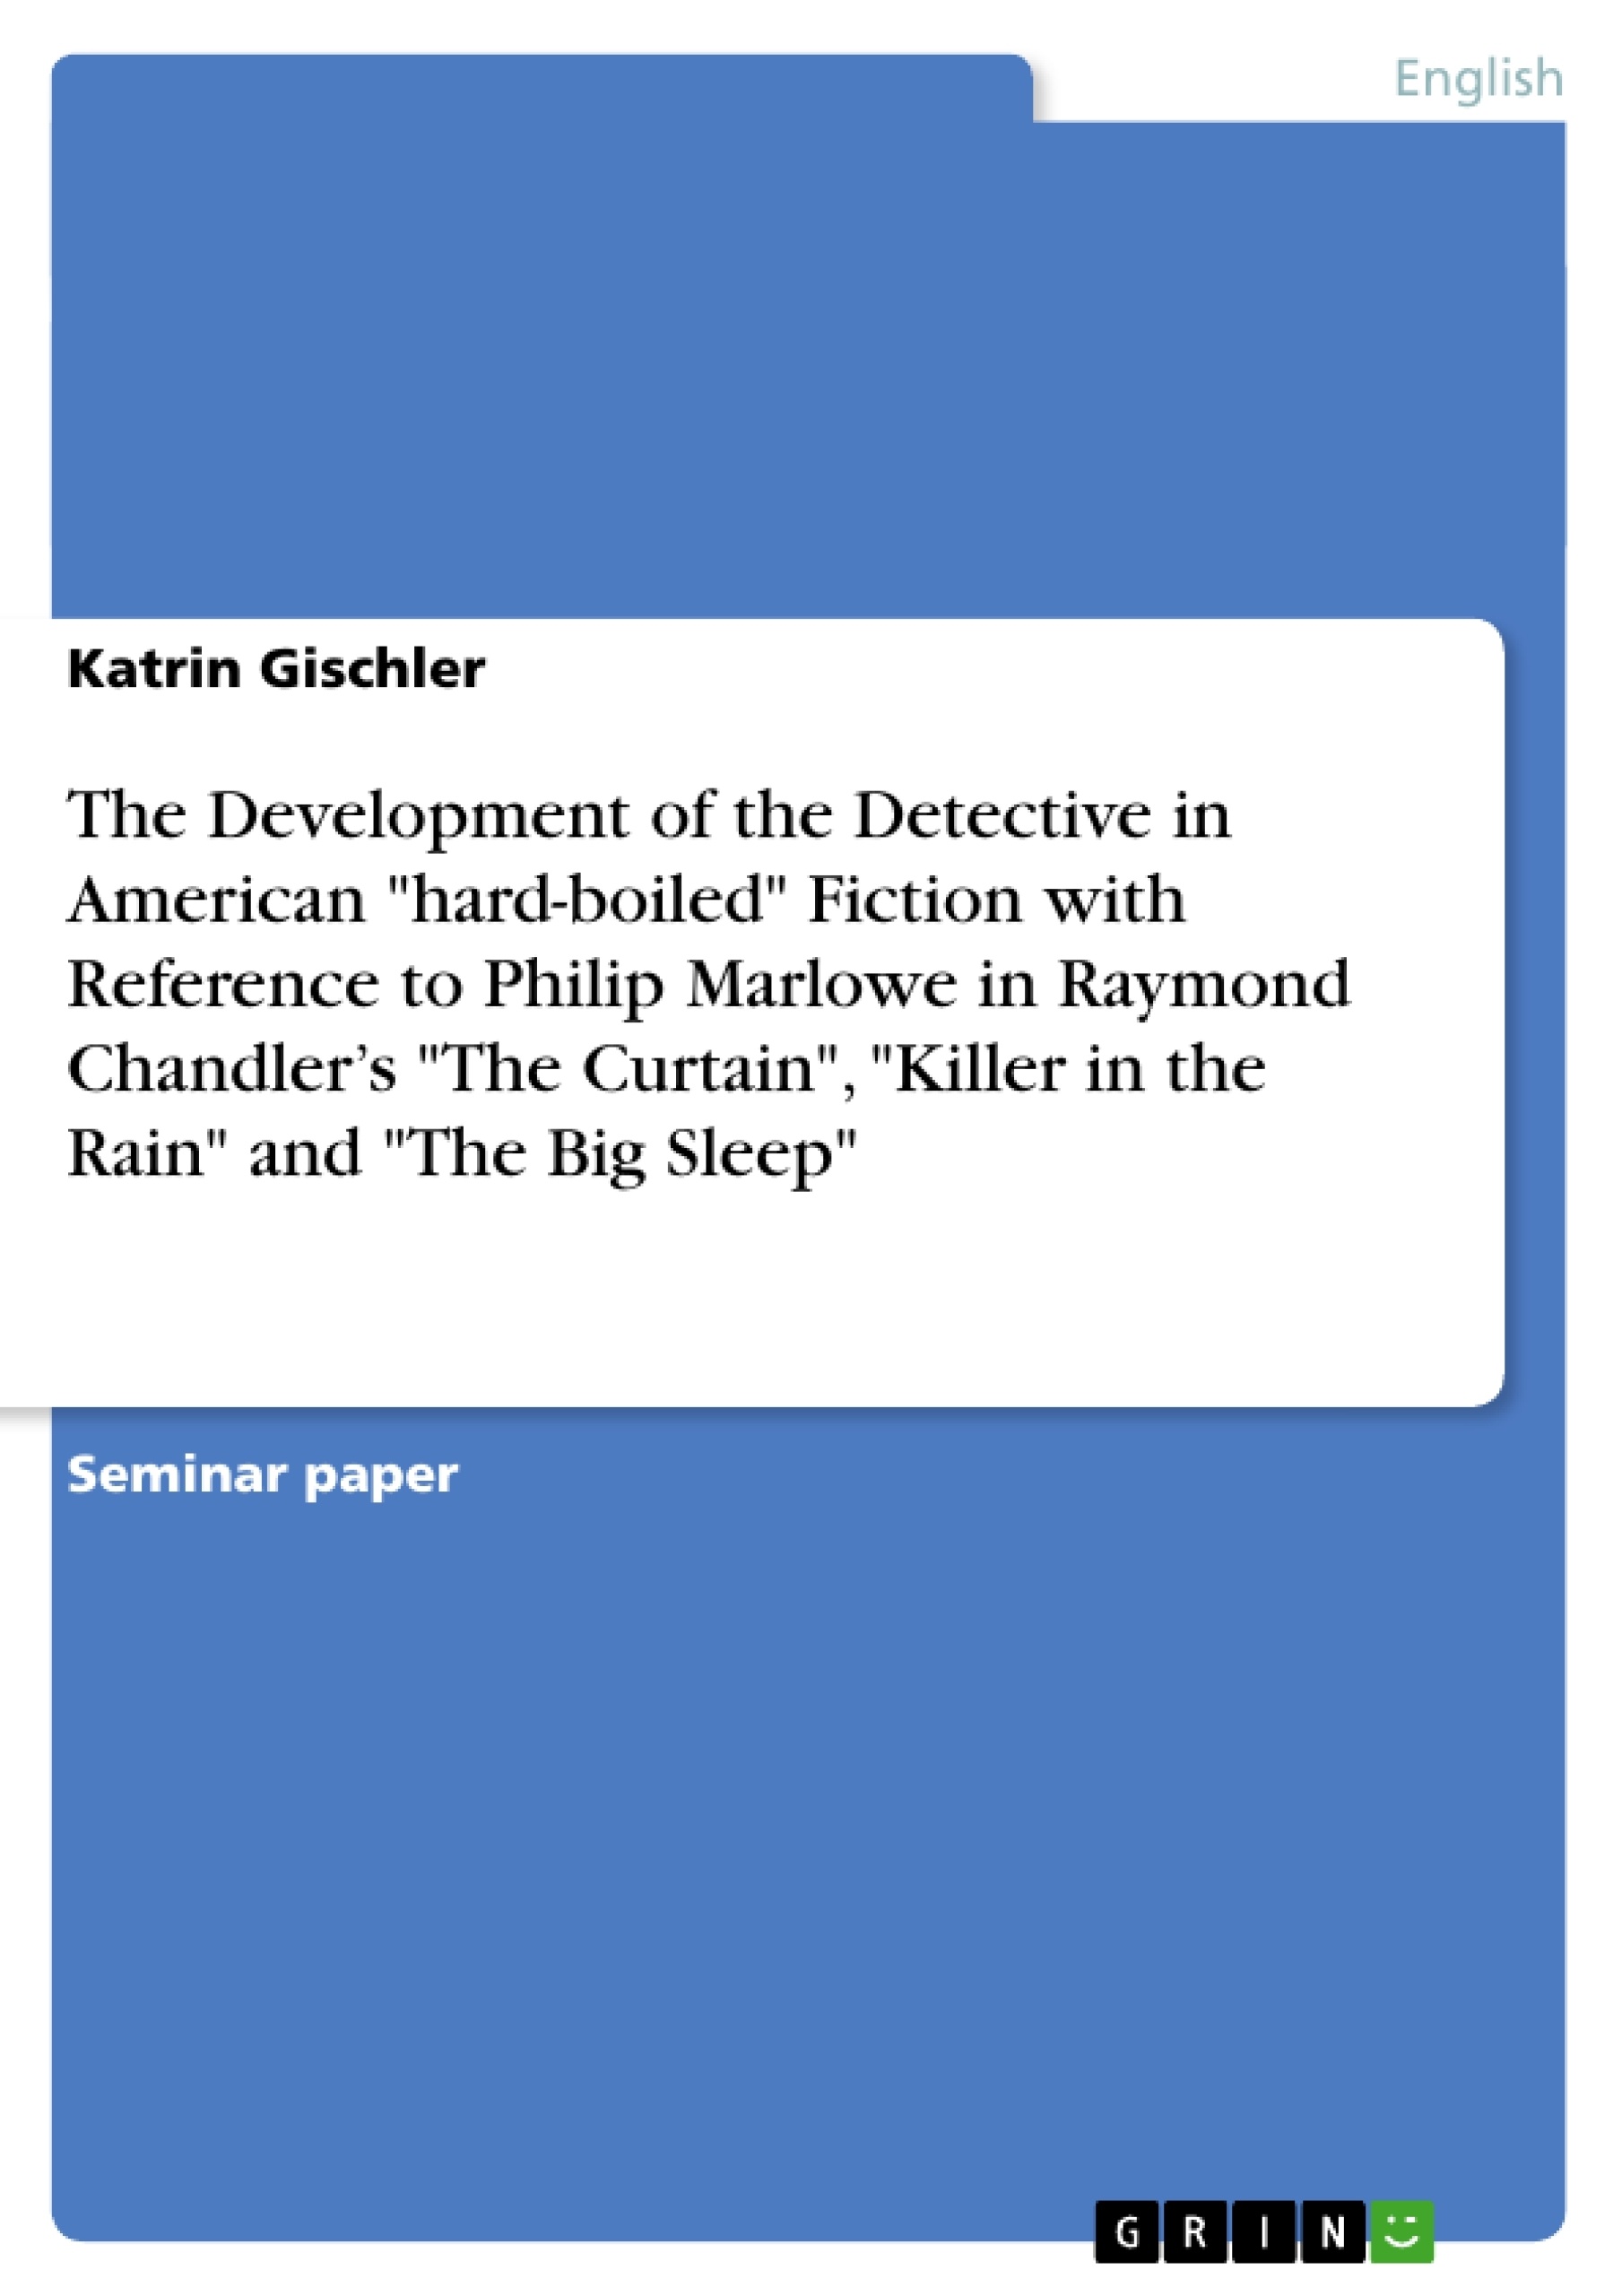 Title: The Development of the Detective in American "hard-boiled" Fiction with Reference to Philip Marlowe in Raymond Chandler’s "The Curtain", "Killer in the Rain" and "The Big Sleep"